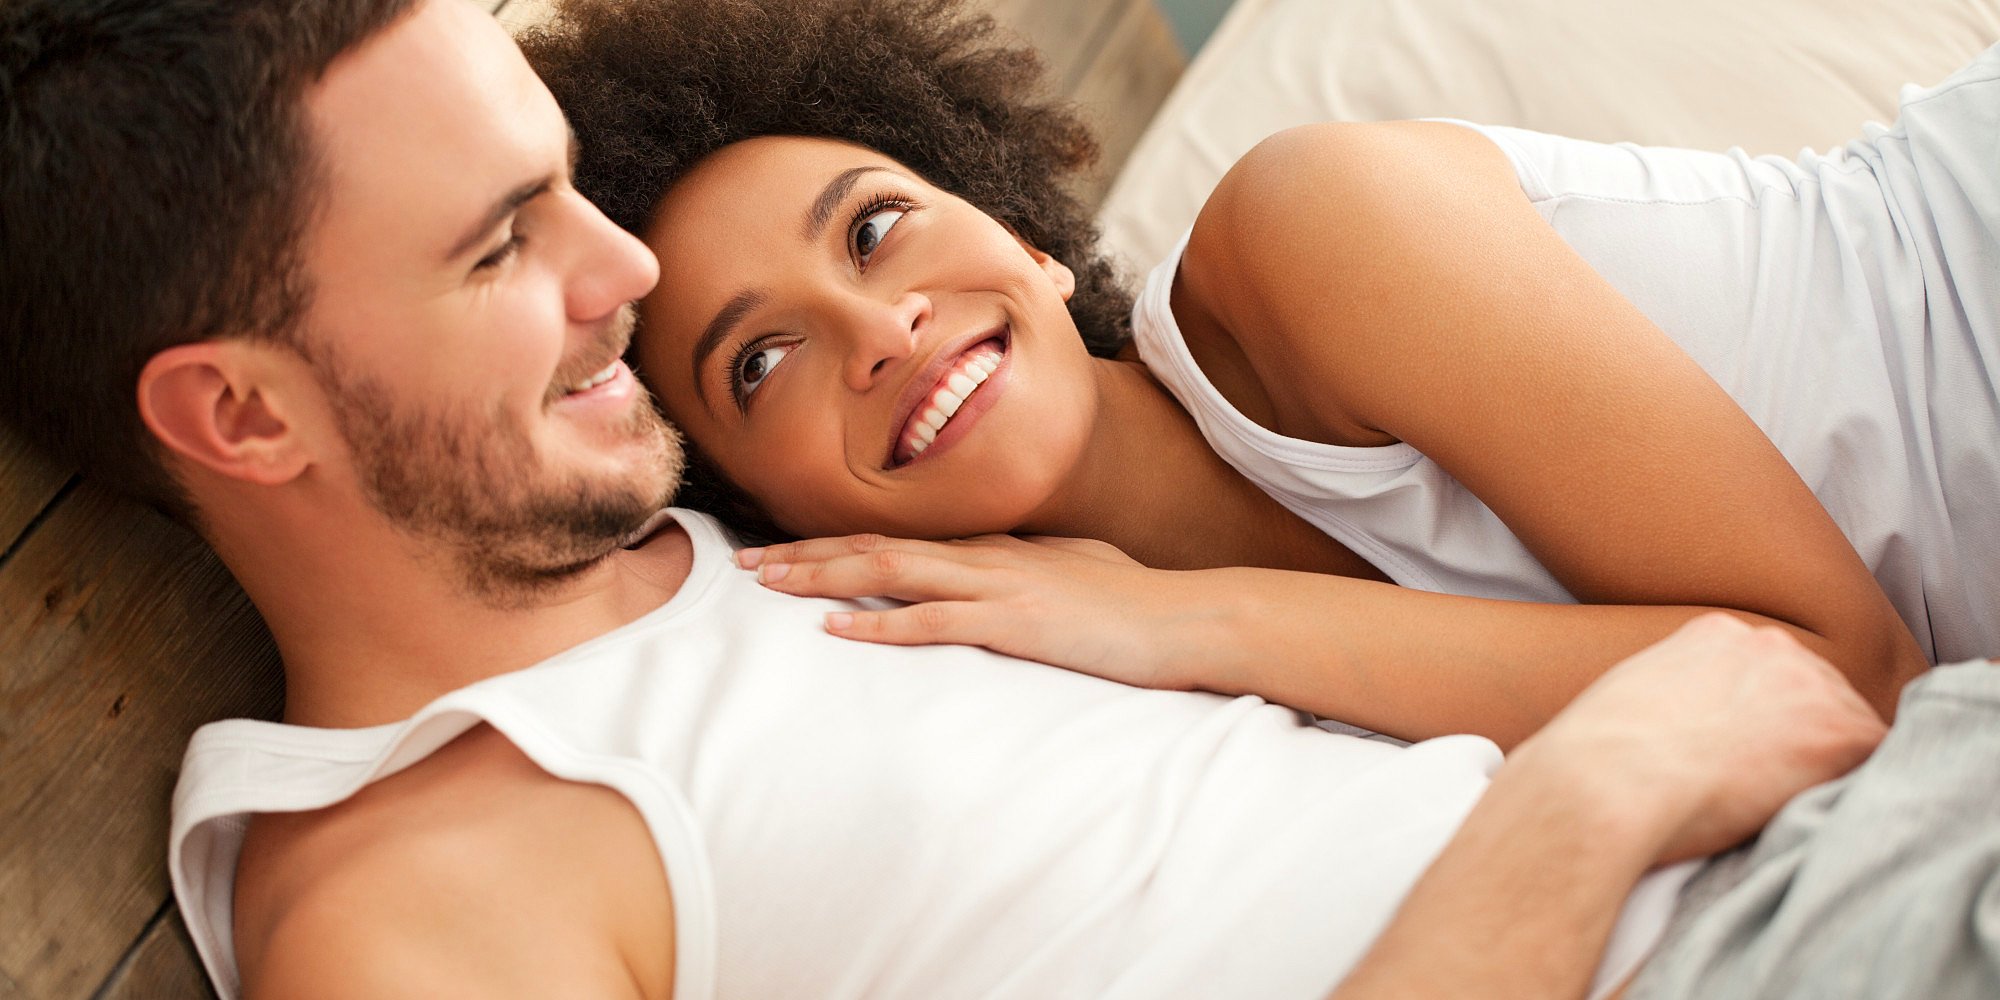 Bedroom Romance Games For Couples